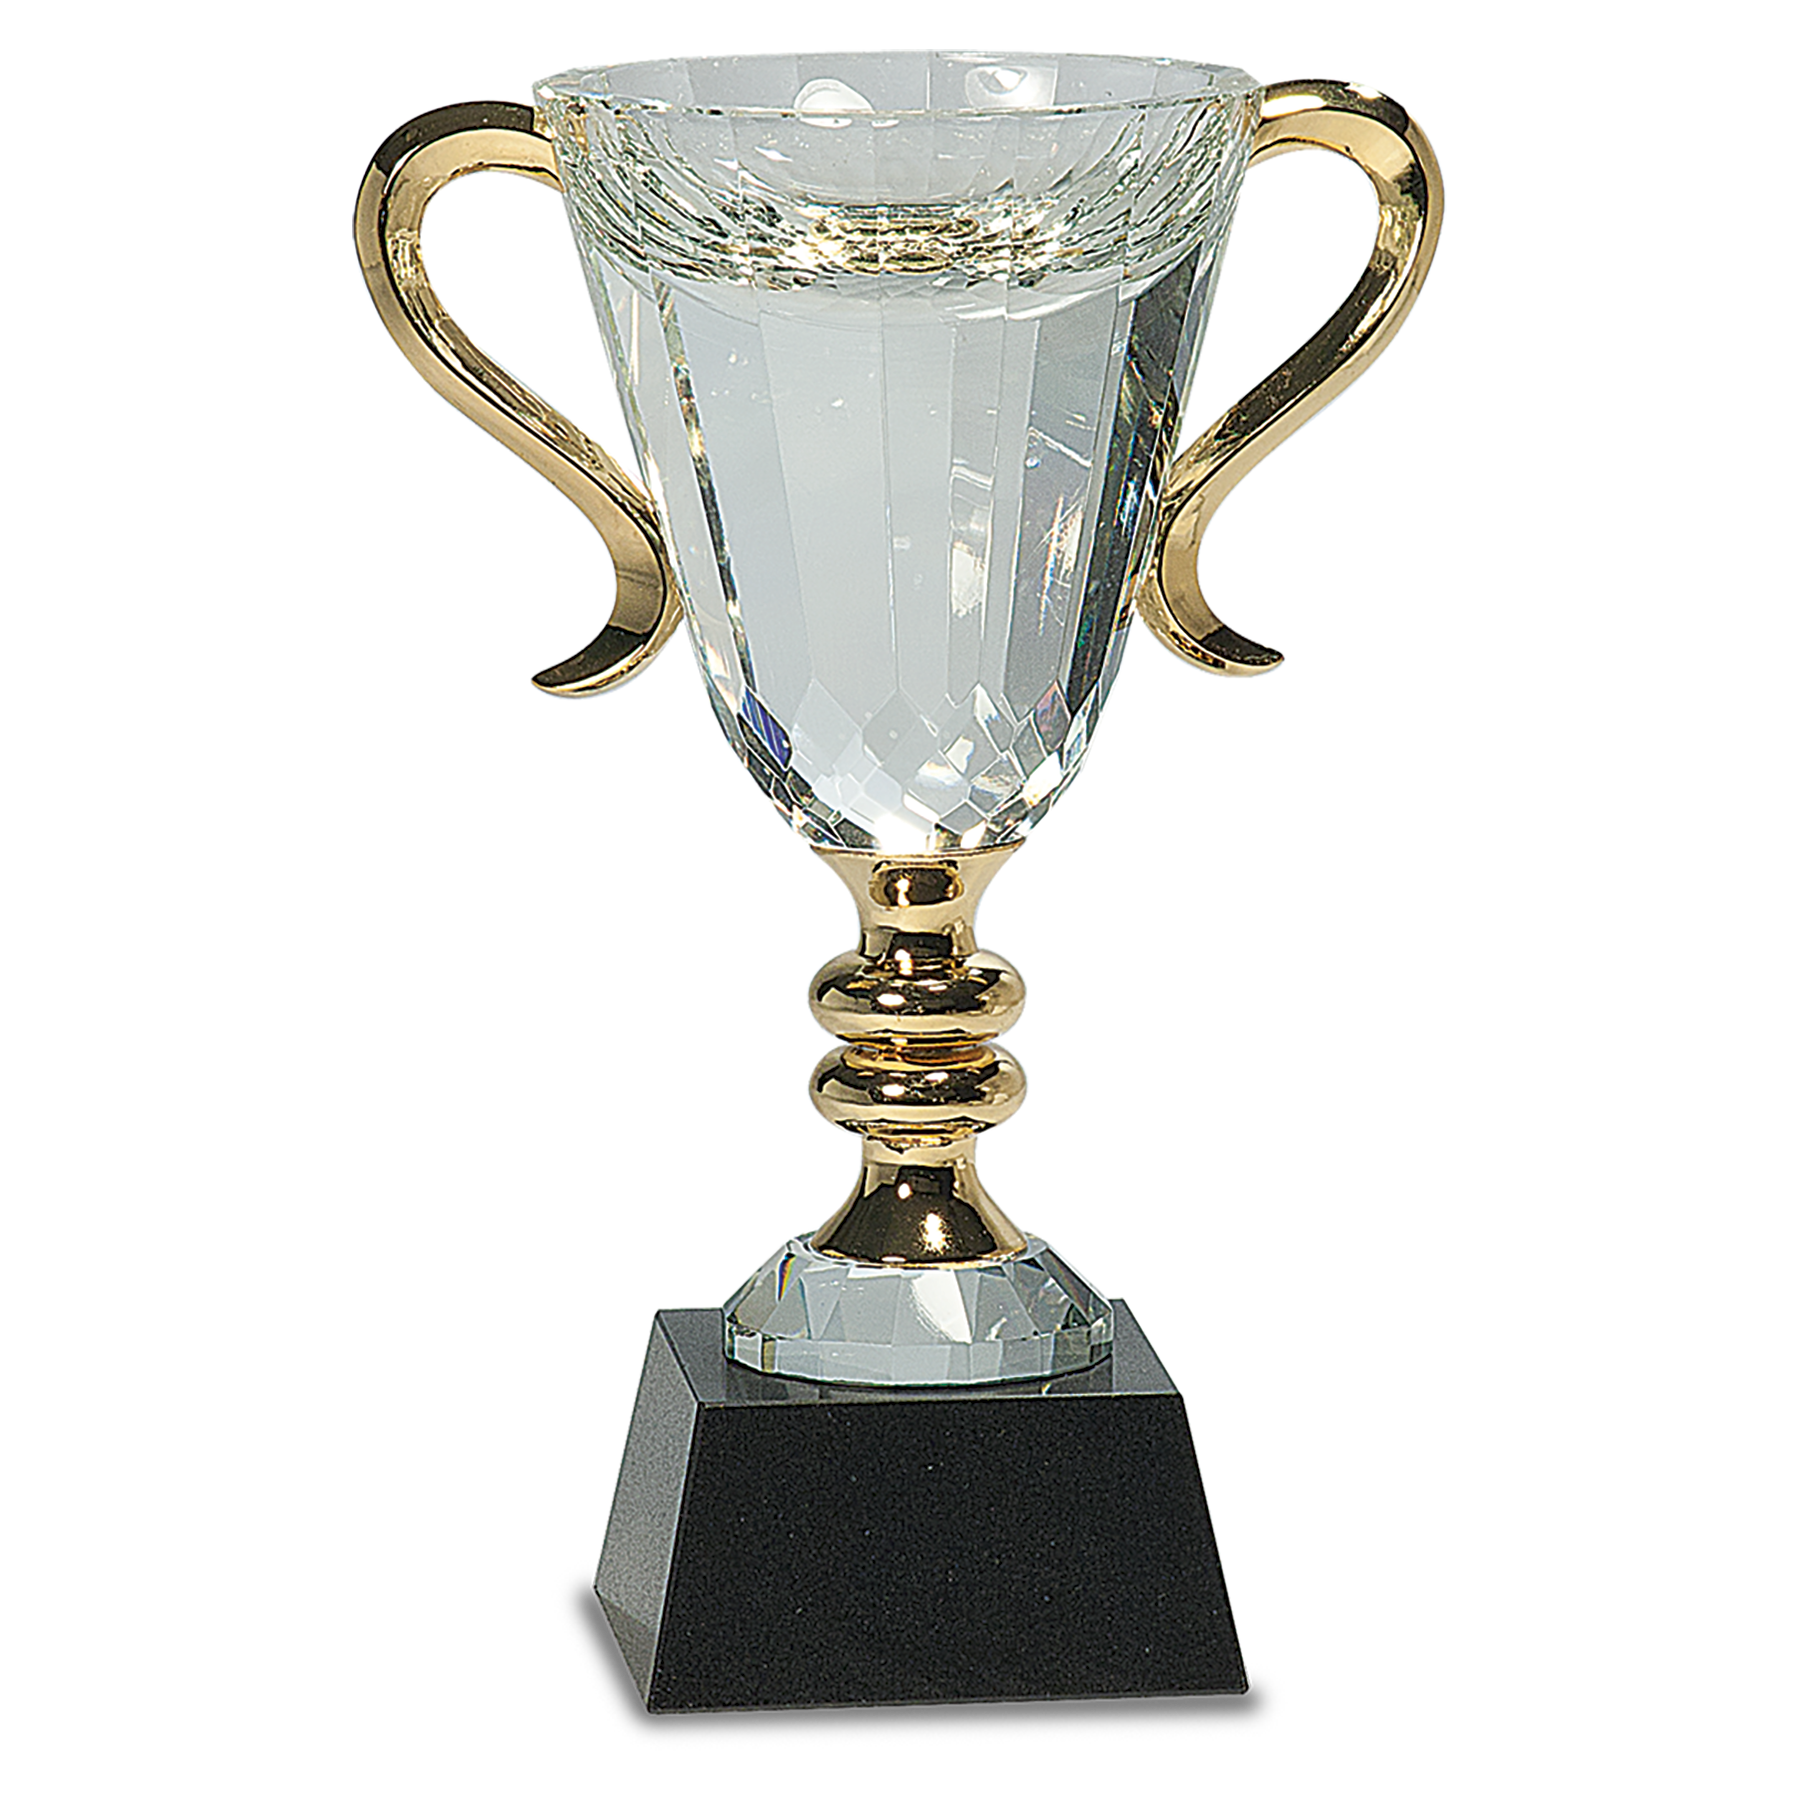 Crystal Trophy Cup Awards with Gold Metal Handles on Black Marble Pedestal